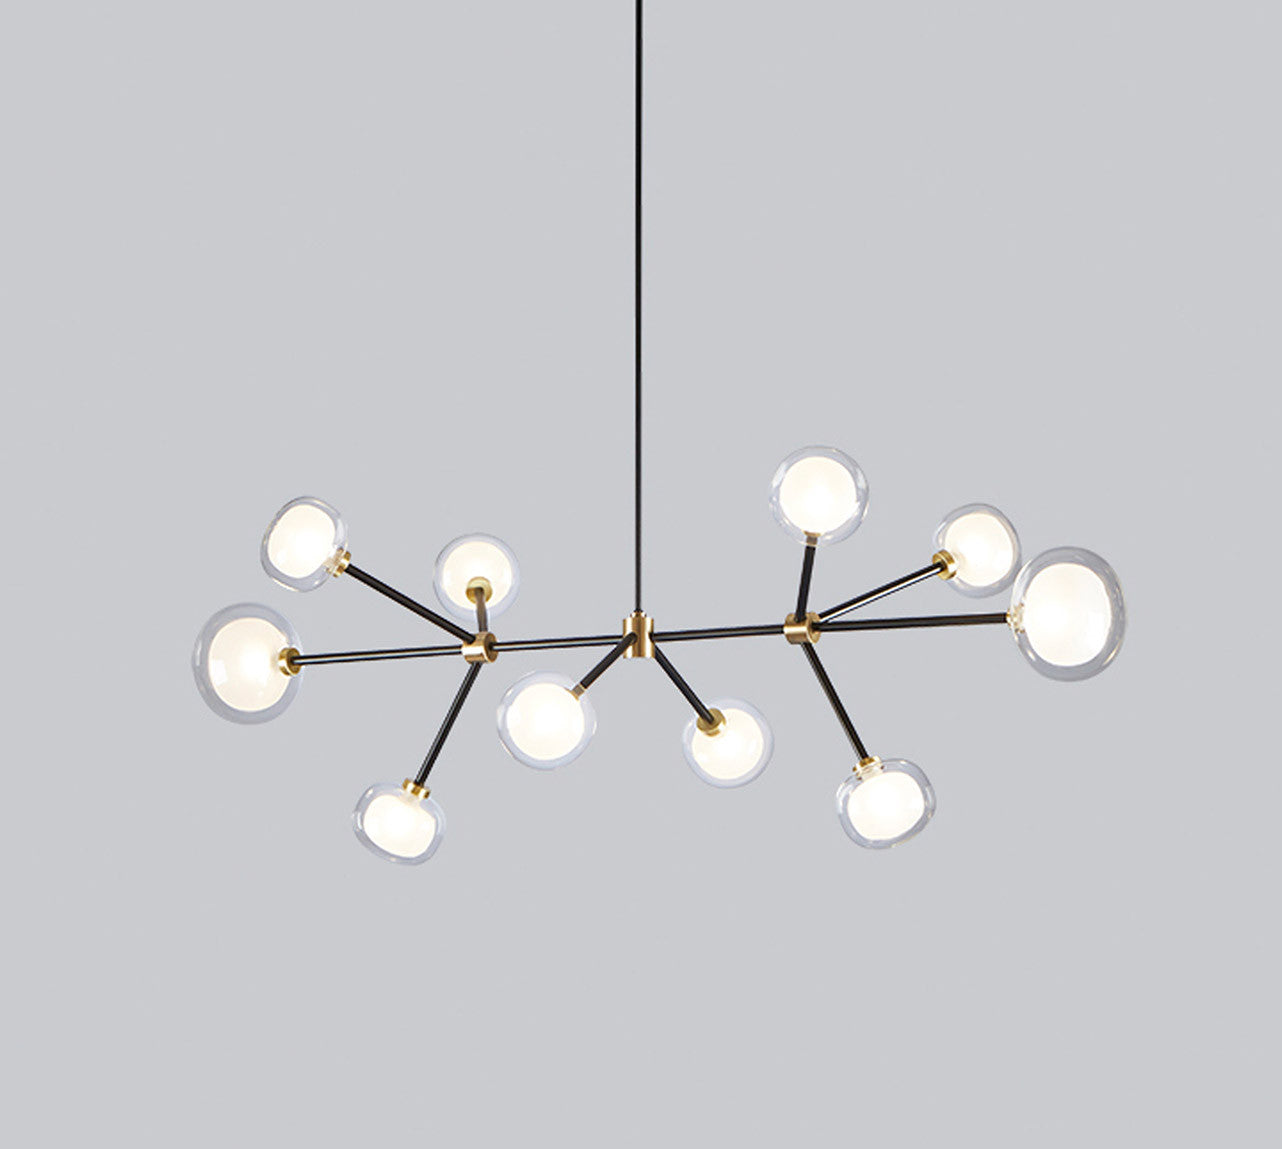 NABILA CHANDELIER 552.10 BY TOOY from $3,738.00